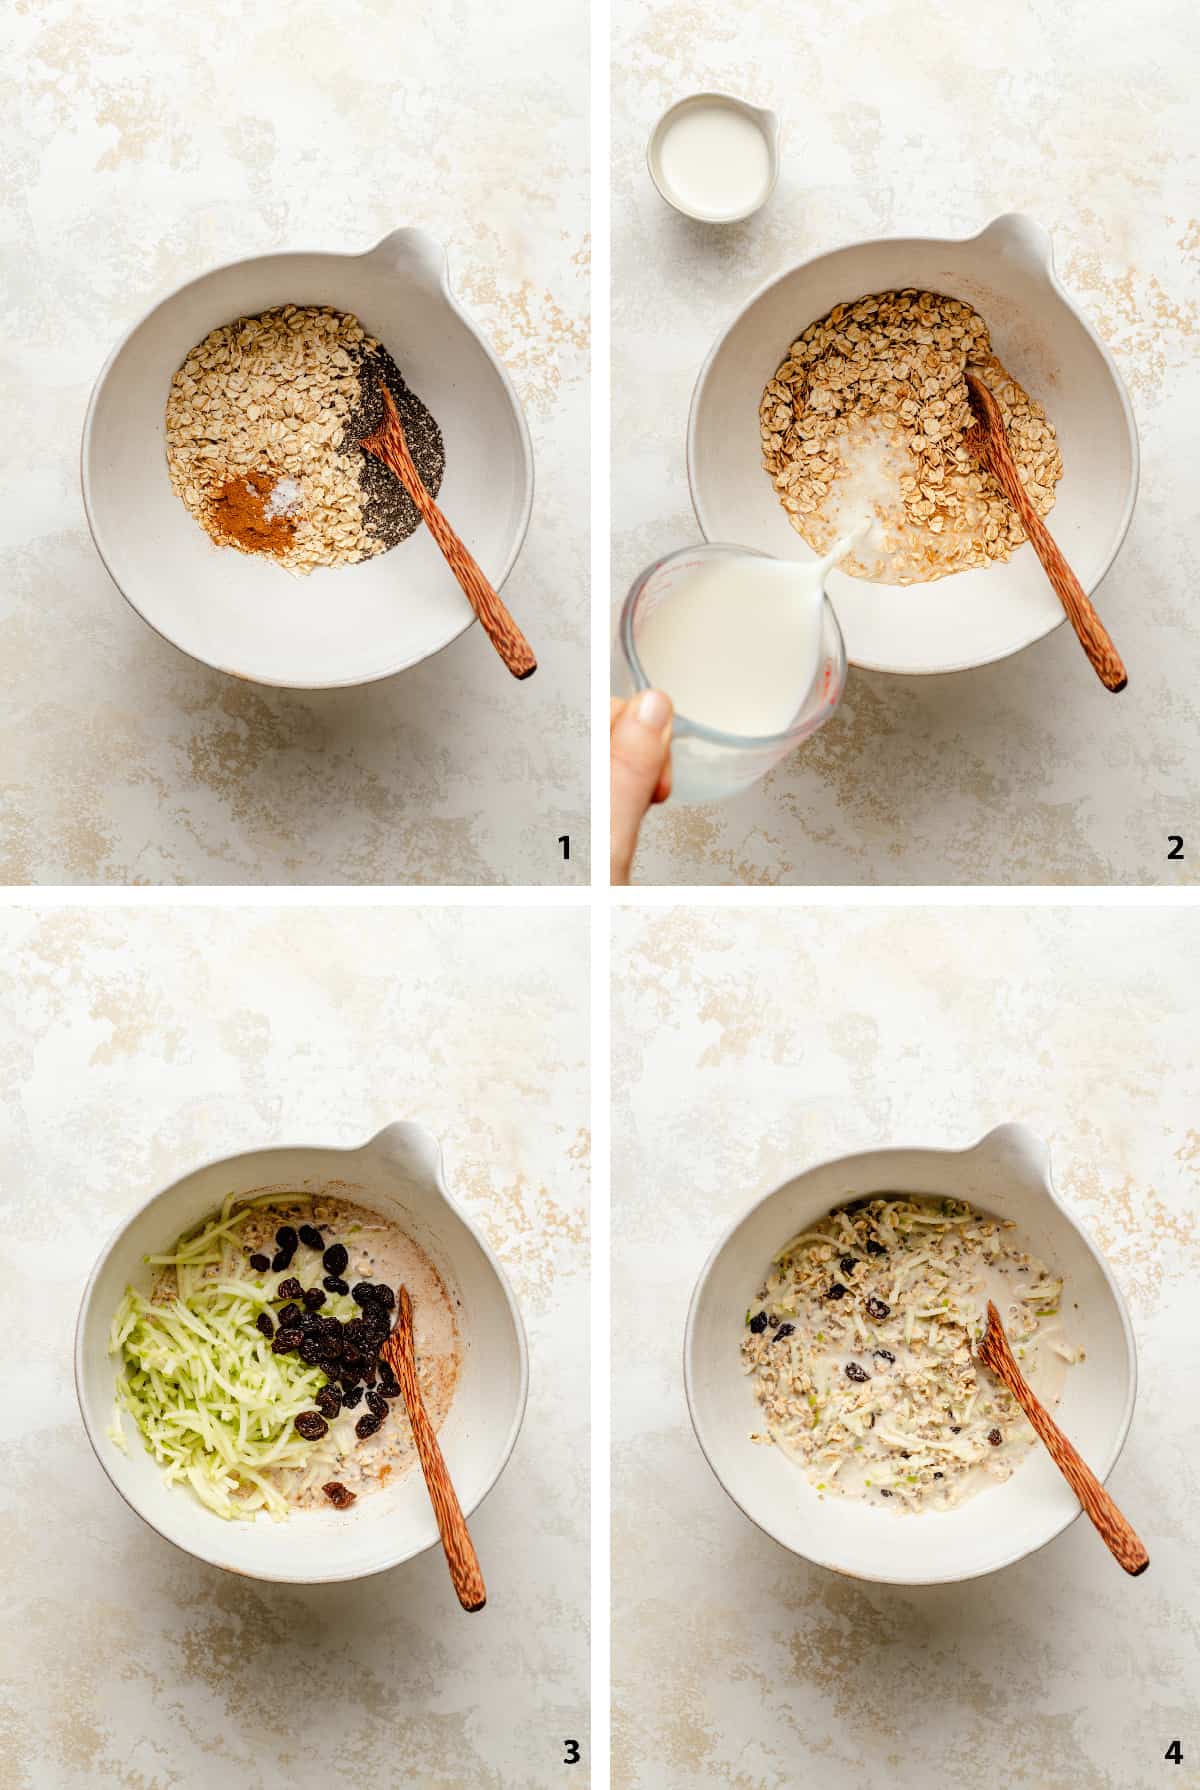 Process steps for making the apple cinnamon overnight oats, mixing the dry, adding milk, and stirring in the mix-ins.